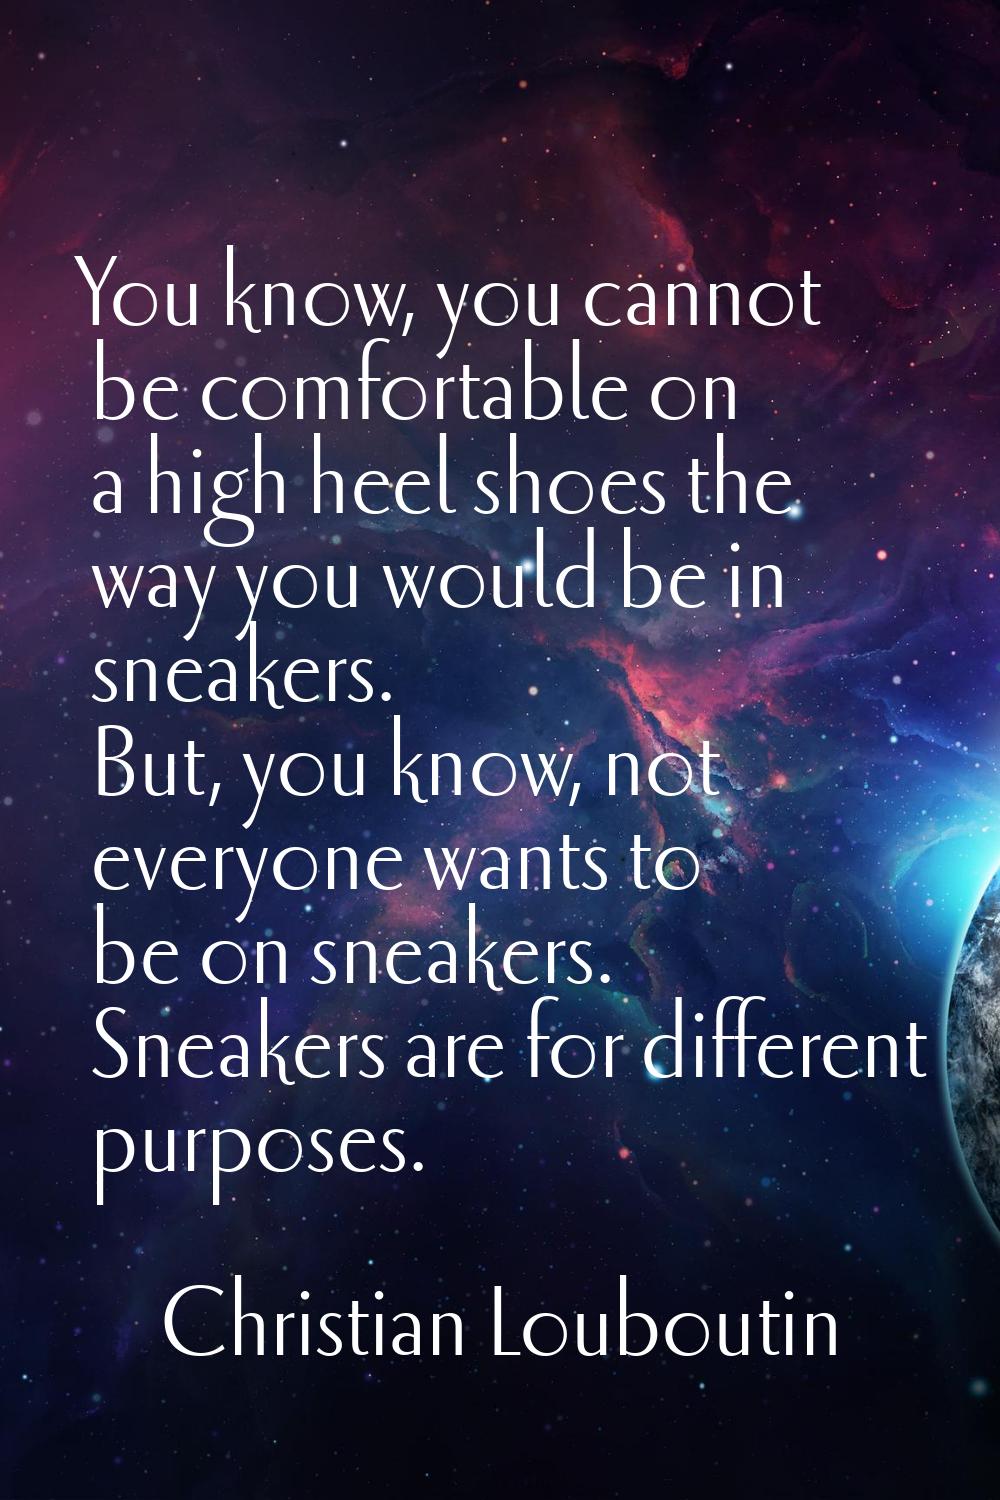 You know, you cannot be comfortable on a high heel shoes the way you would be in sneakers. But, you